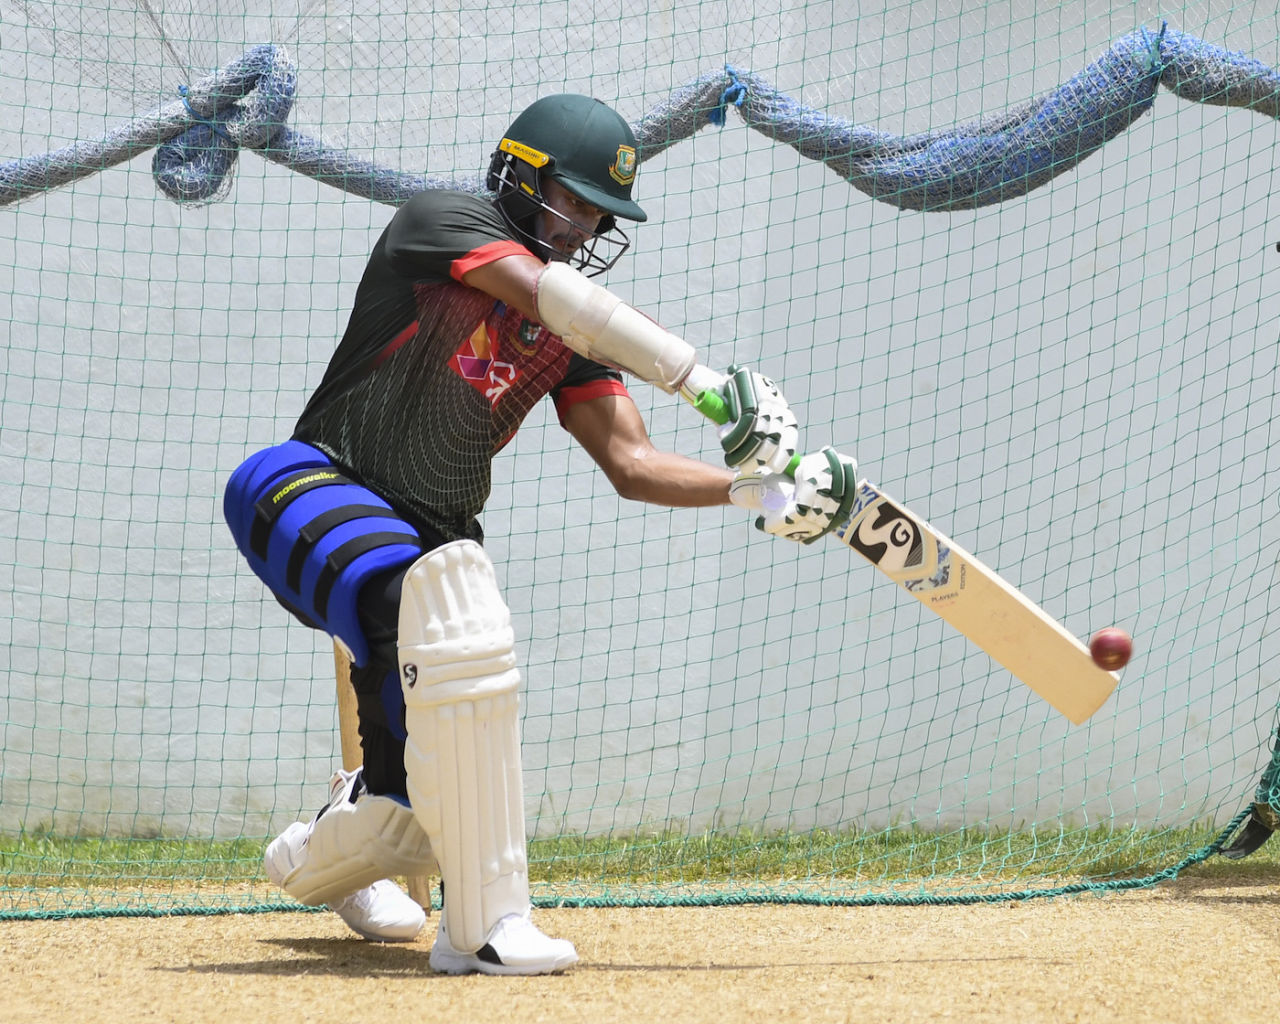 Shakib Al Hasan takes part in a training session ahead of the second Test, West Indies vs Bangladesh, Sabina Park, Kingston, Jamaica, July 11, 2018